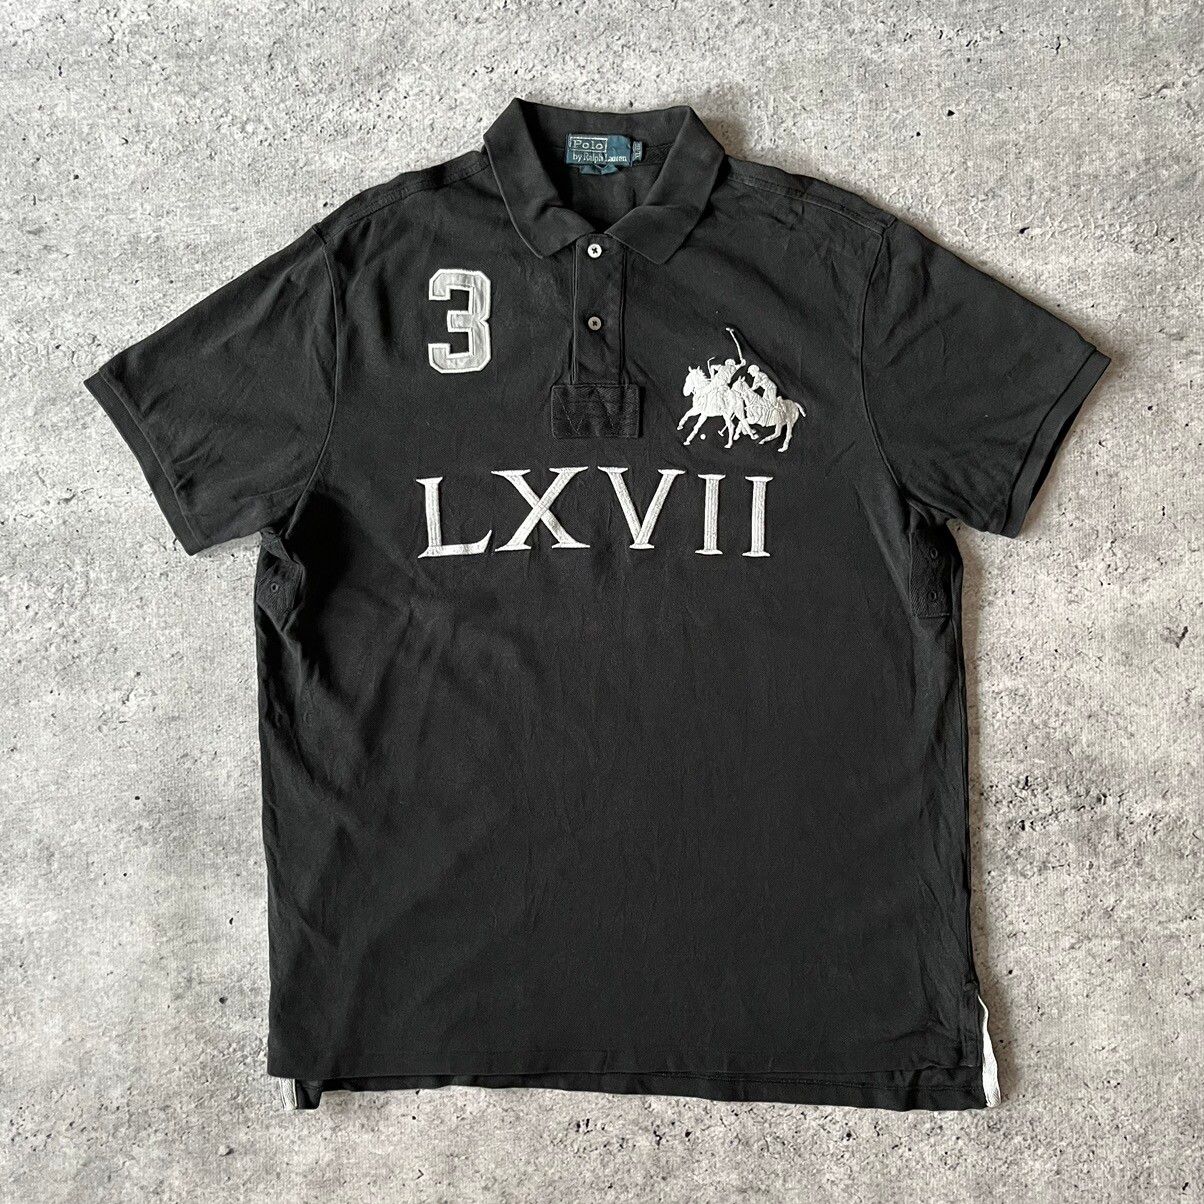 Pre-owned Polo Ralph Lauren X Vintage Ralph Laurent Polo Tee Lxvii 3 Vintage Polo Shirt 90's In Black